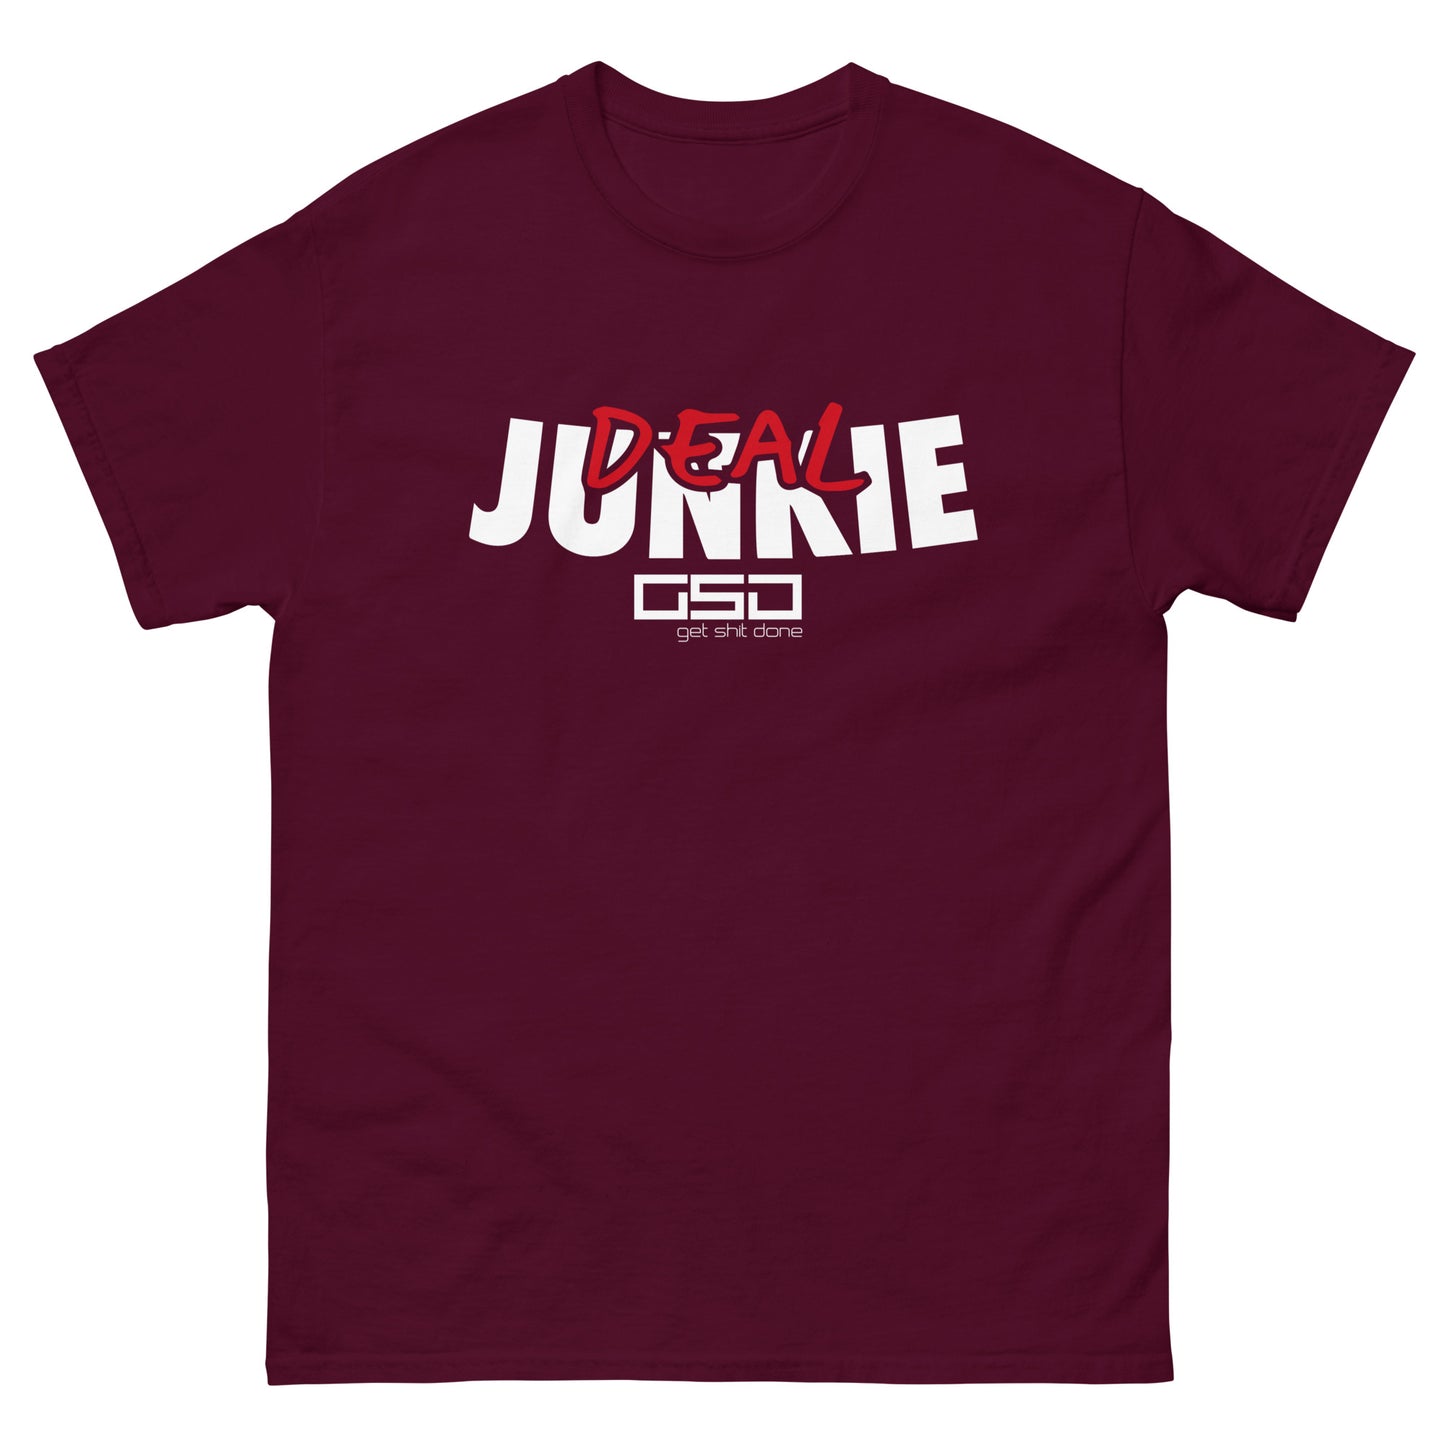 Deal Junkie-Classic tee